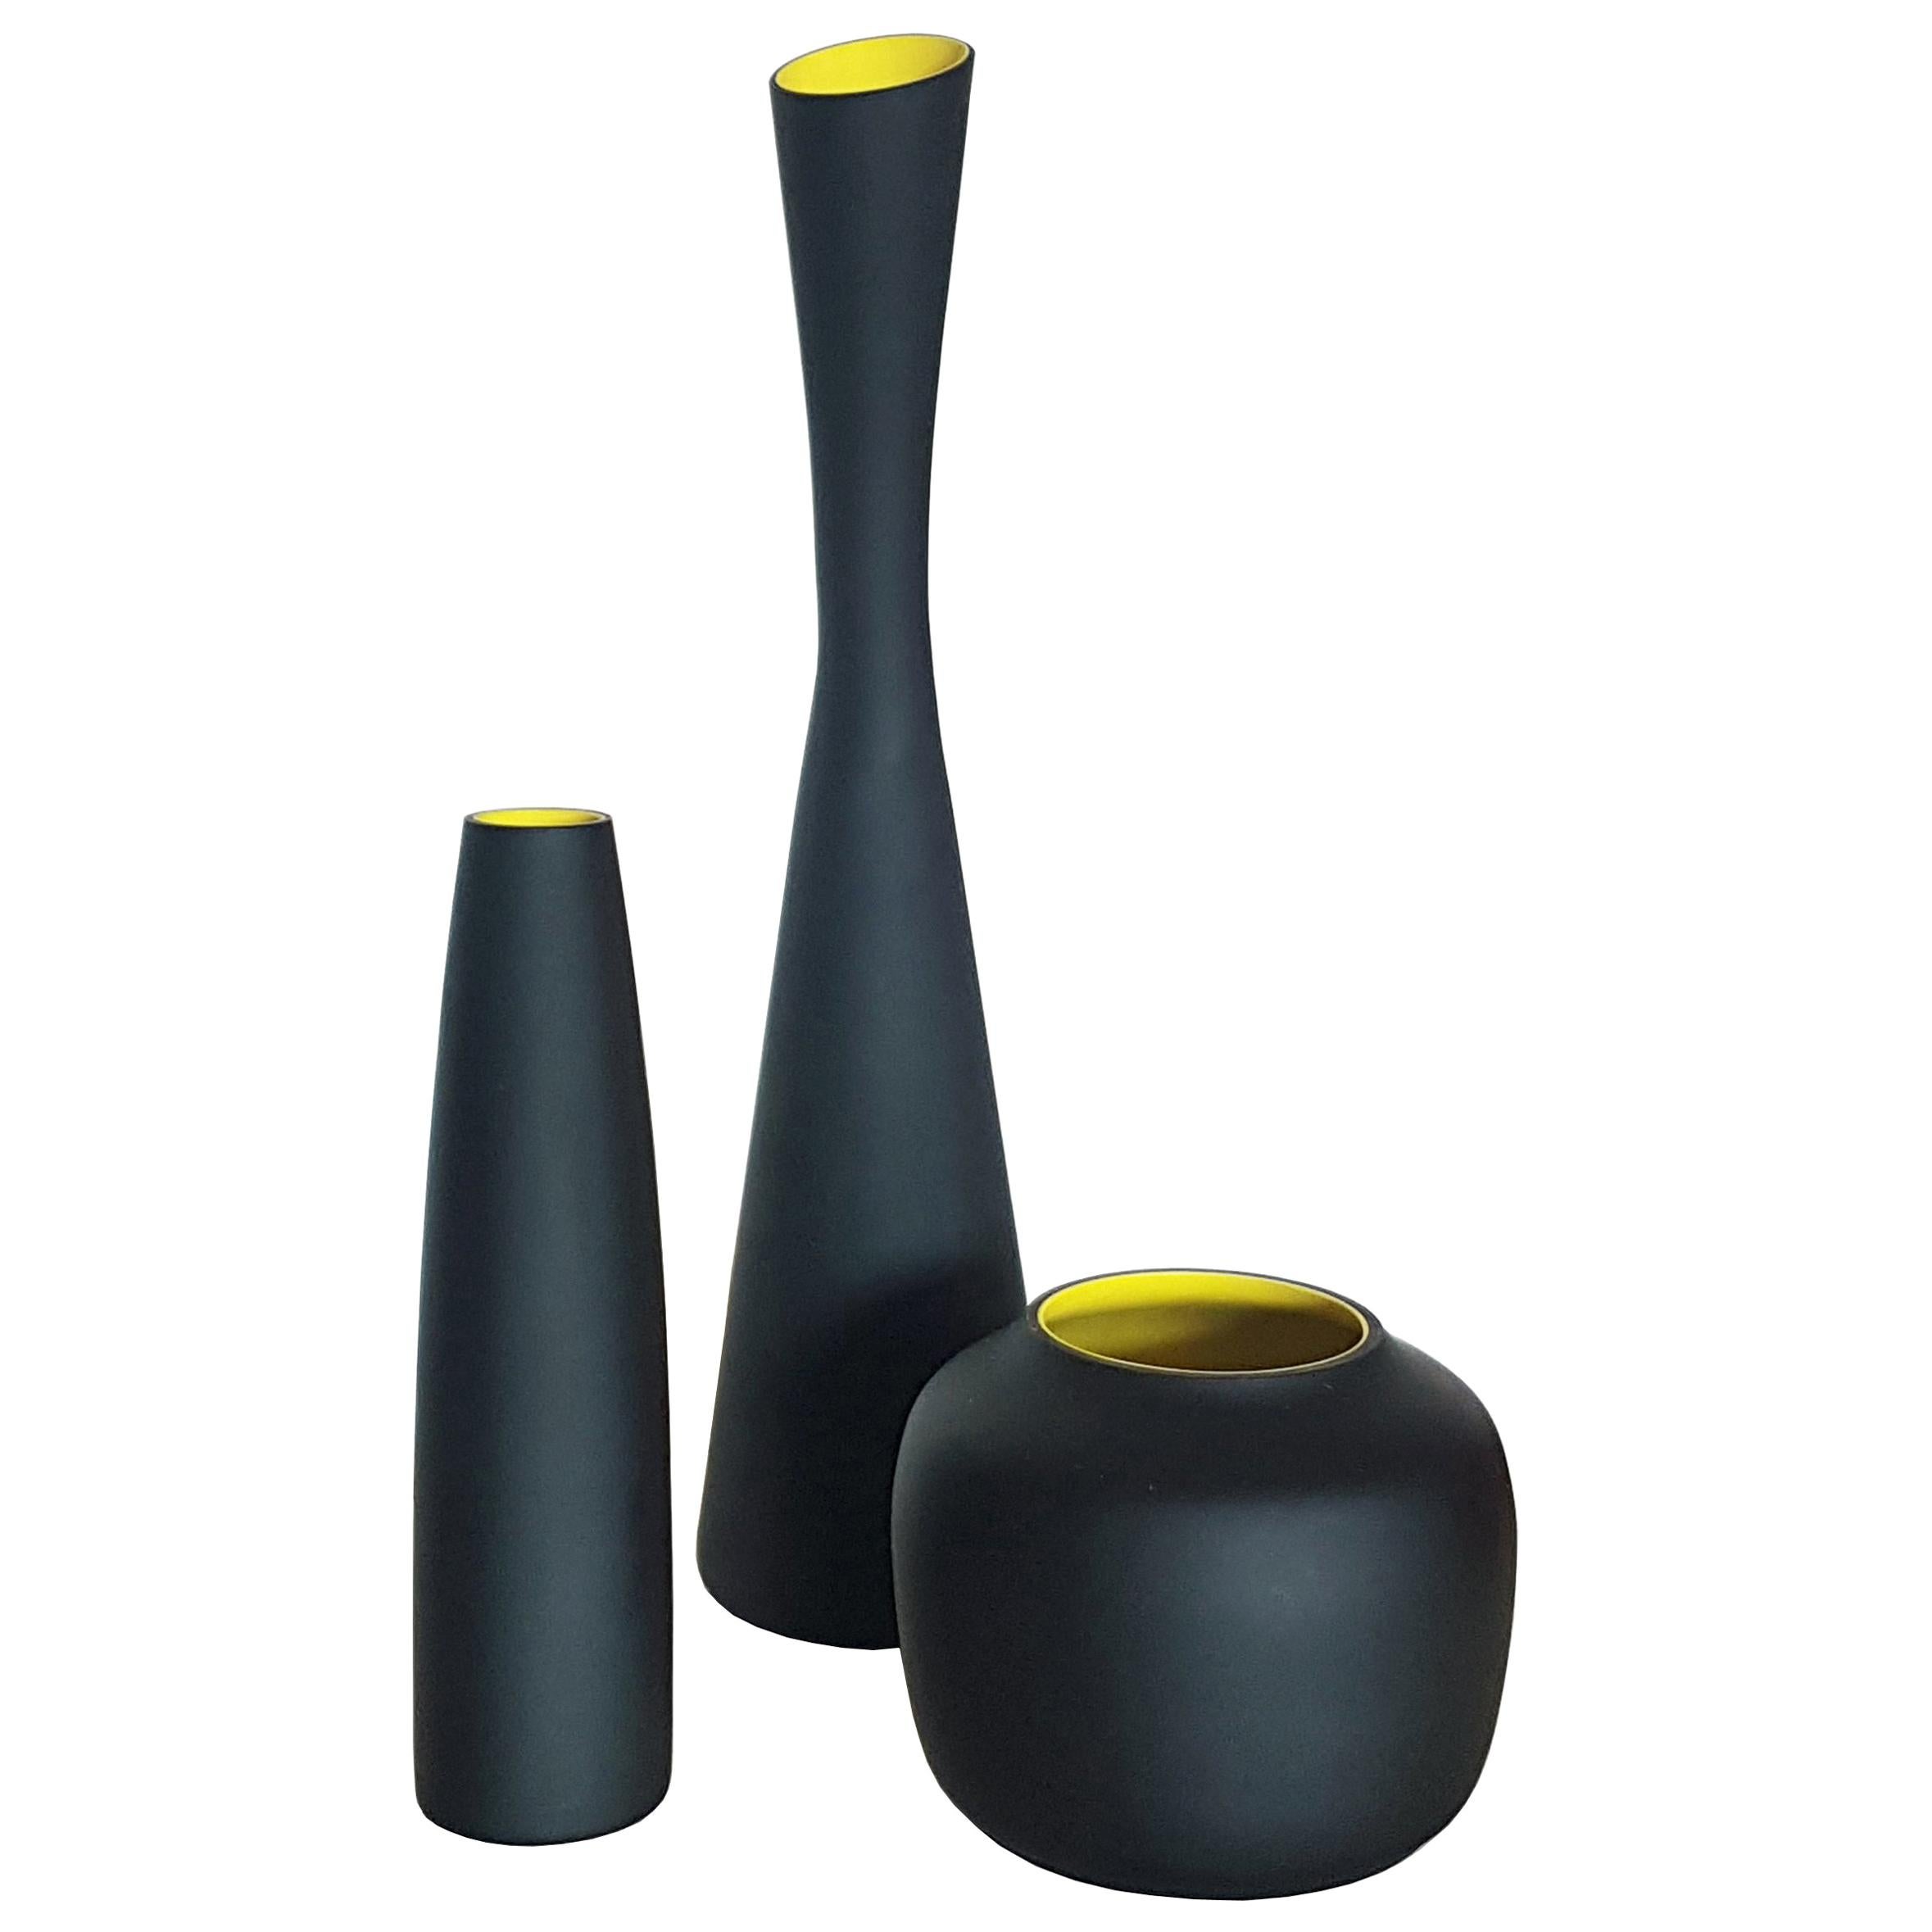 Set of Three Murano Incamiciato Black and Yellow Glass Vases, 1950s For Sale